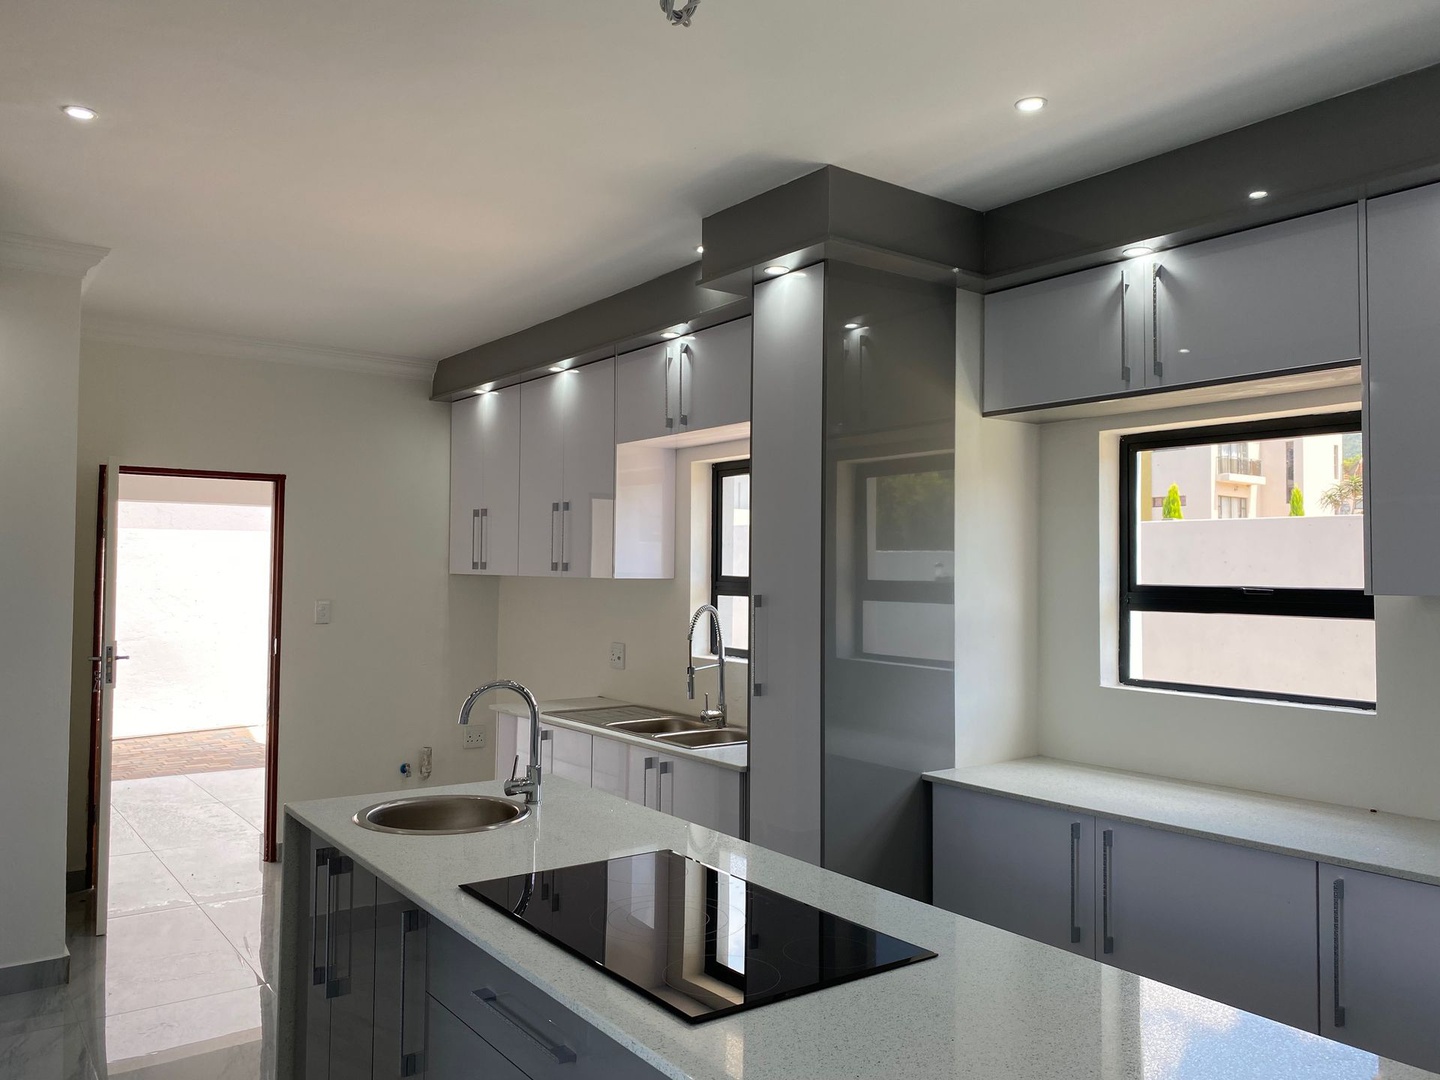 House in Leloko Lifestyle & Eco Estate - Kitchen / Scullery